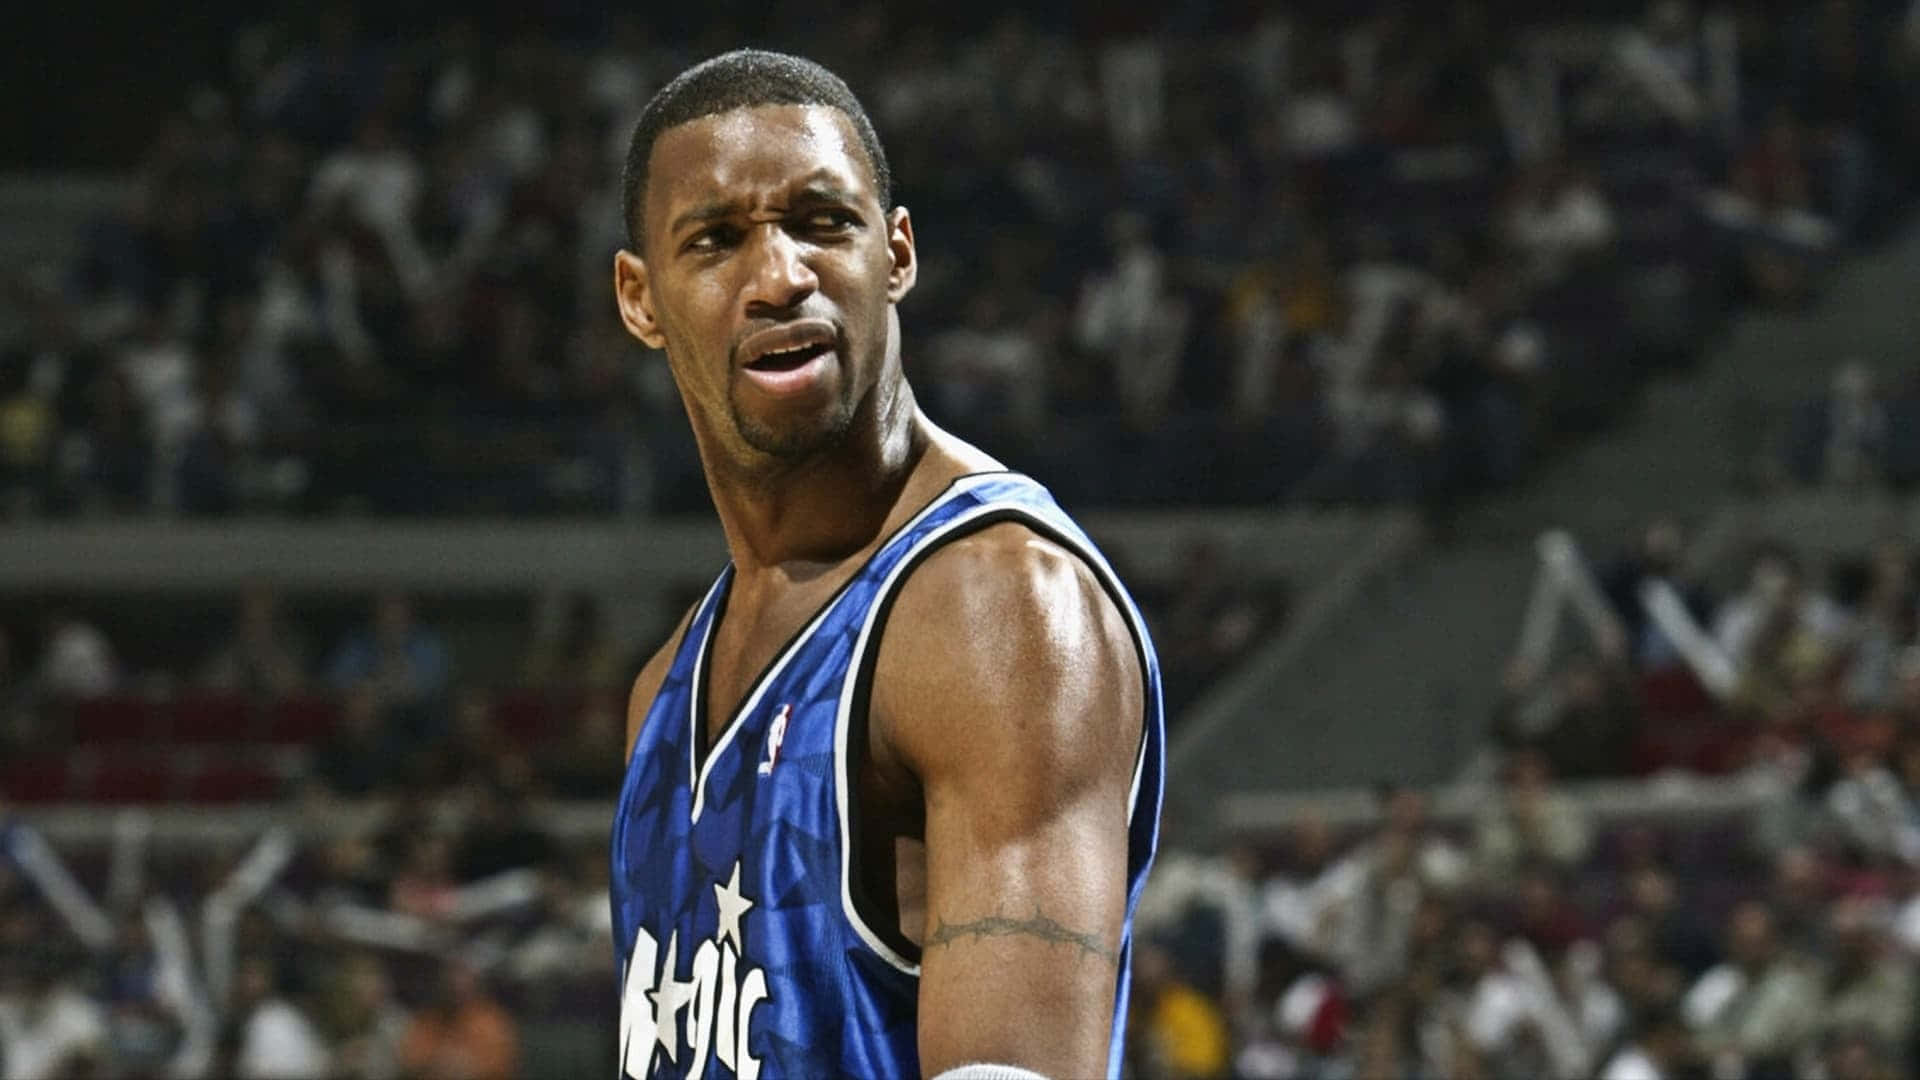 Tracy McGrady thanks the cities of Toronto, Orlando and Houston in